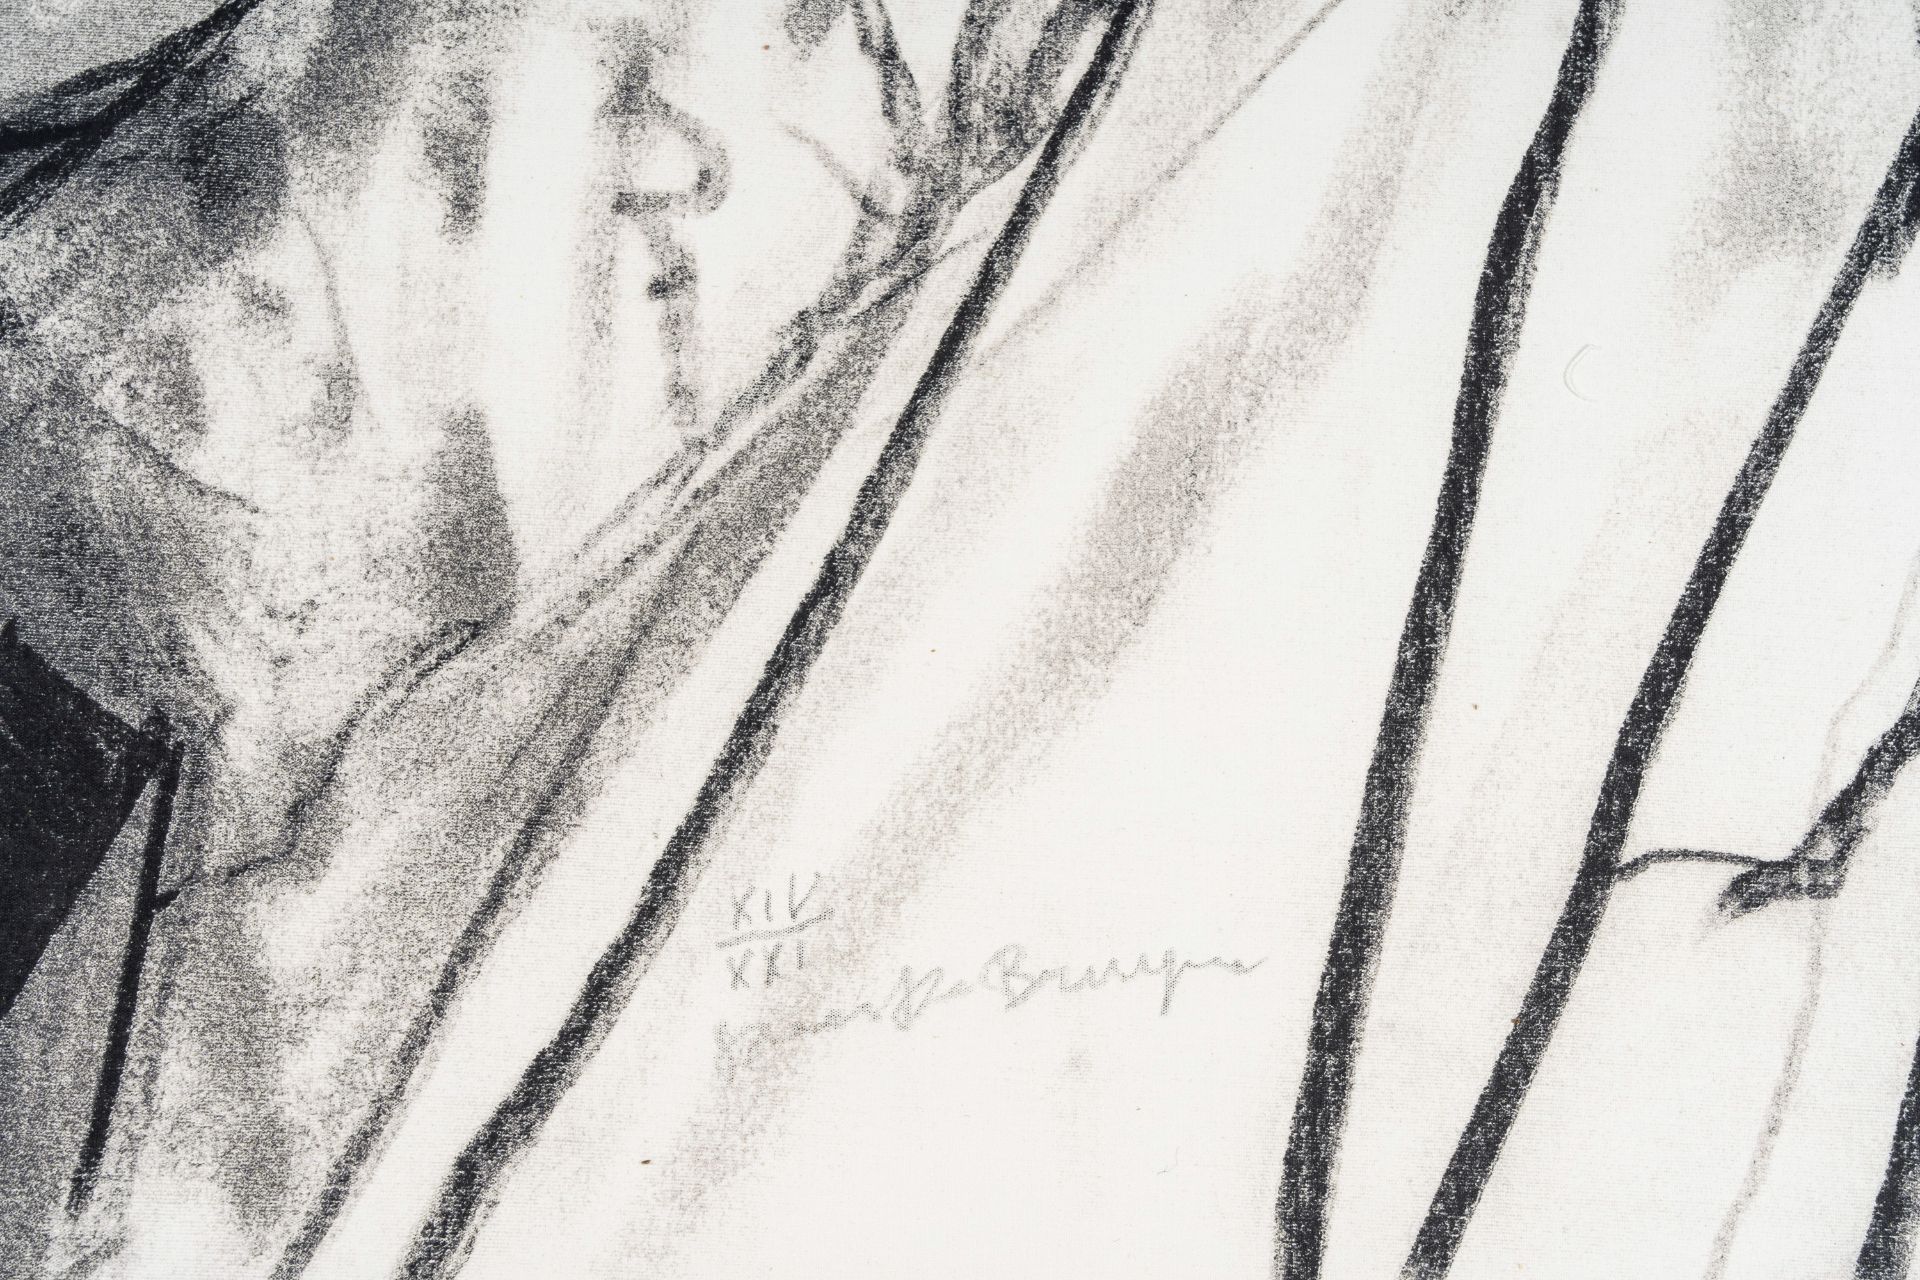 Dees De Bruyne (1940-1988): 'Love your son', seven lithographs on canvas, ed. XIV/XXI - Image 21 of 26